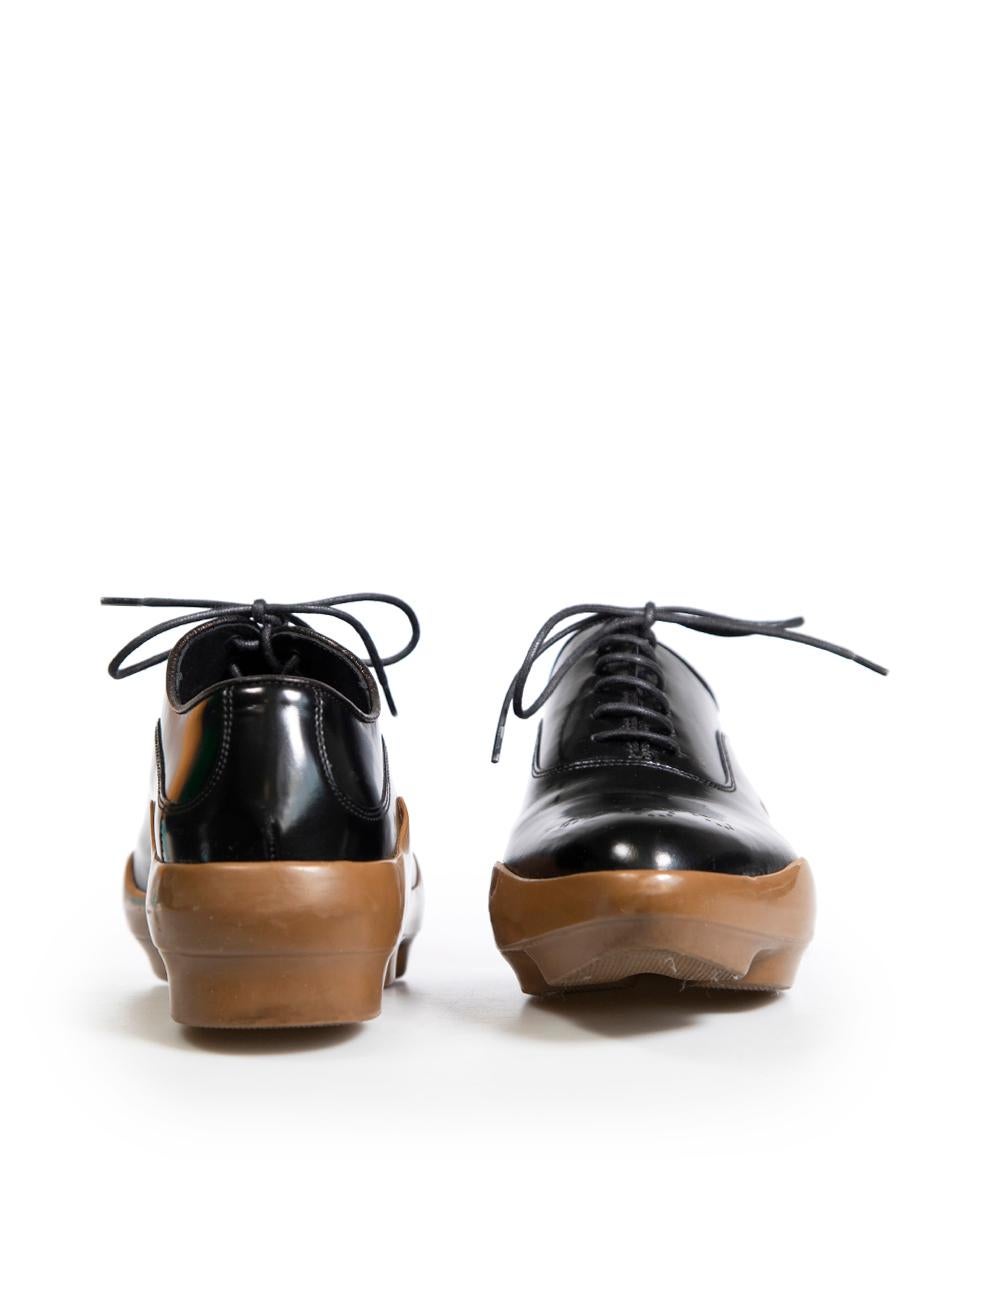 Prada Black Leather Contrast Sole Derby Oxfords Size IT 37.5 In Good Condition For Sale In London, GB